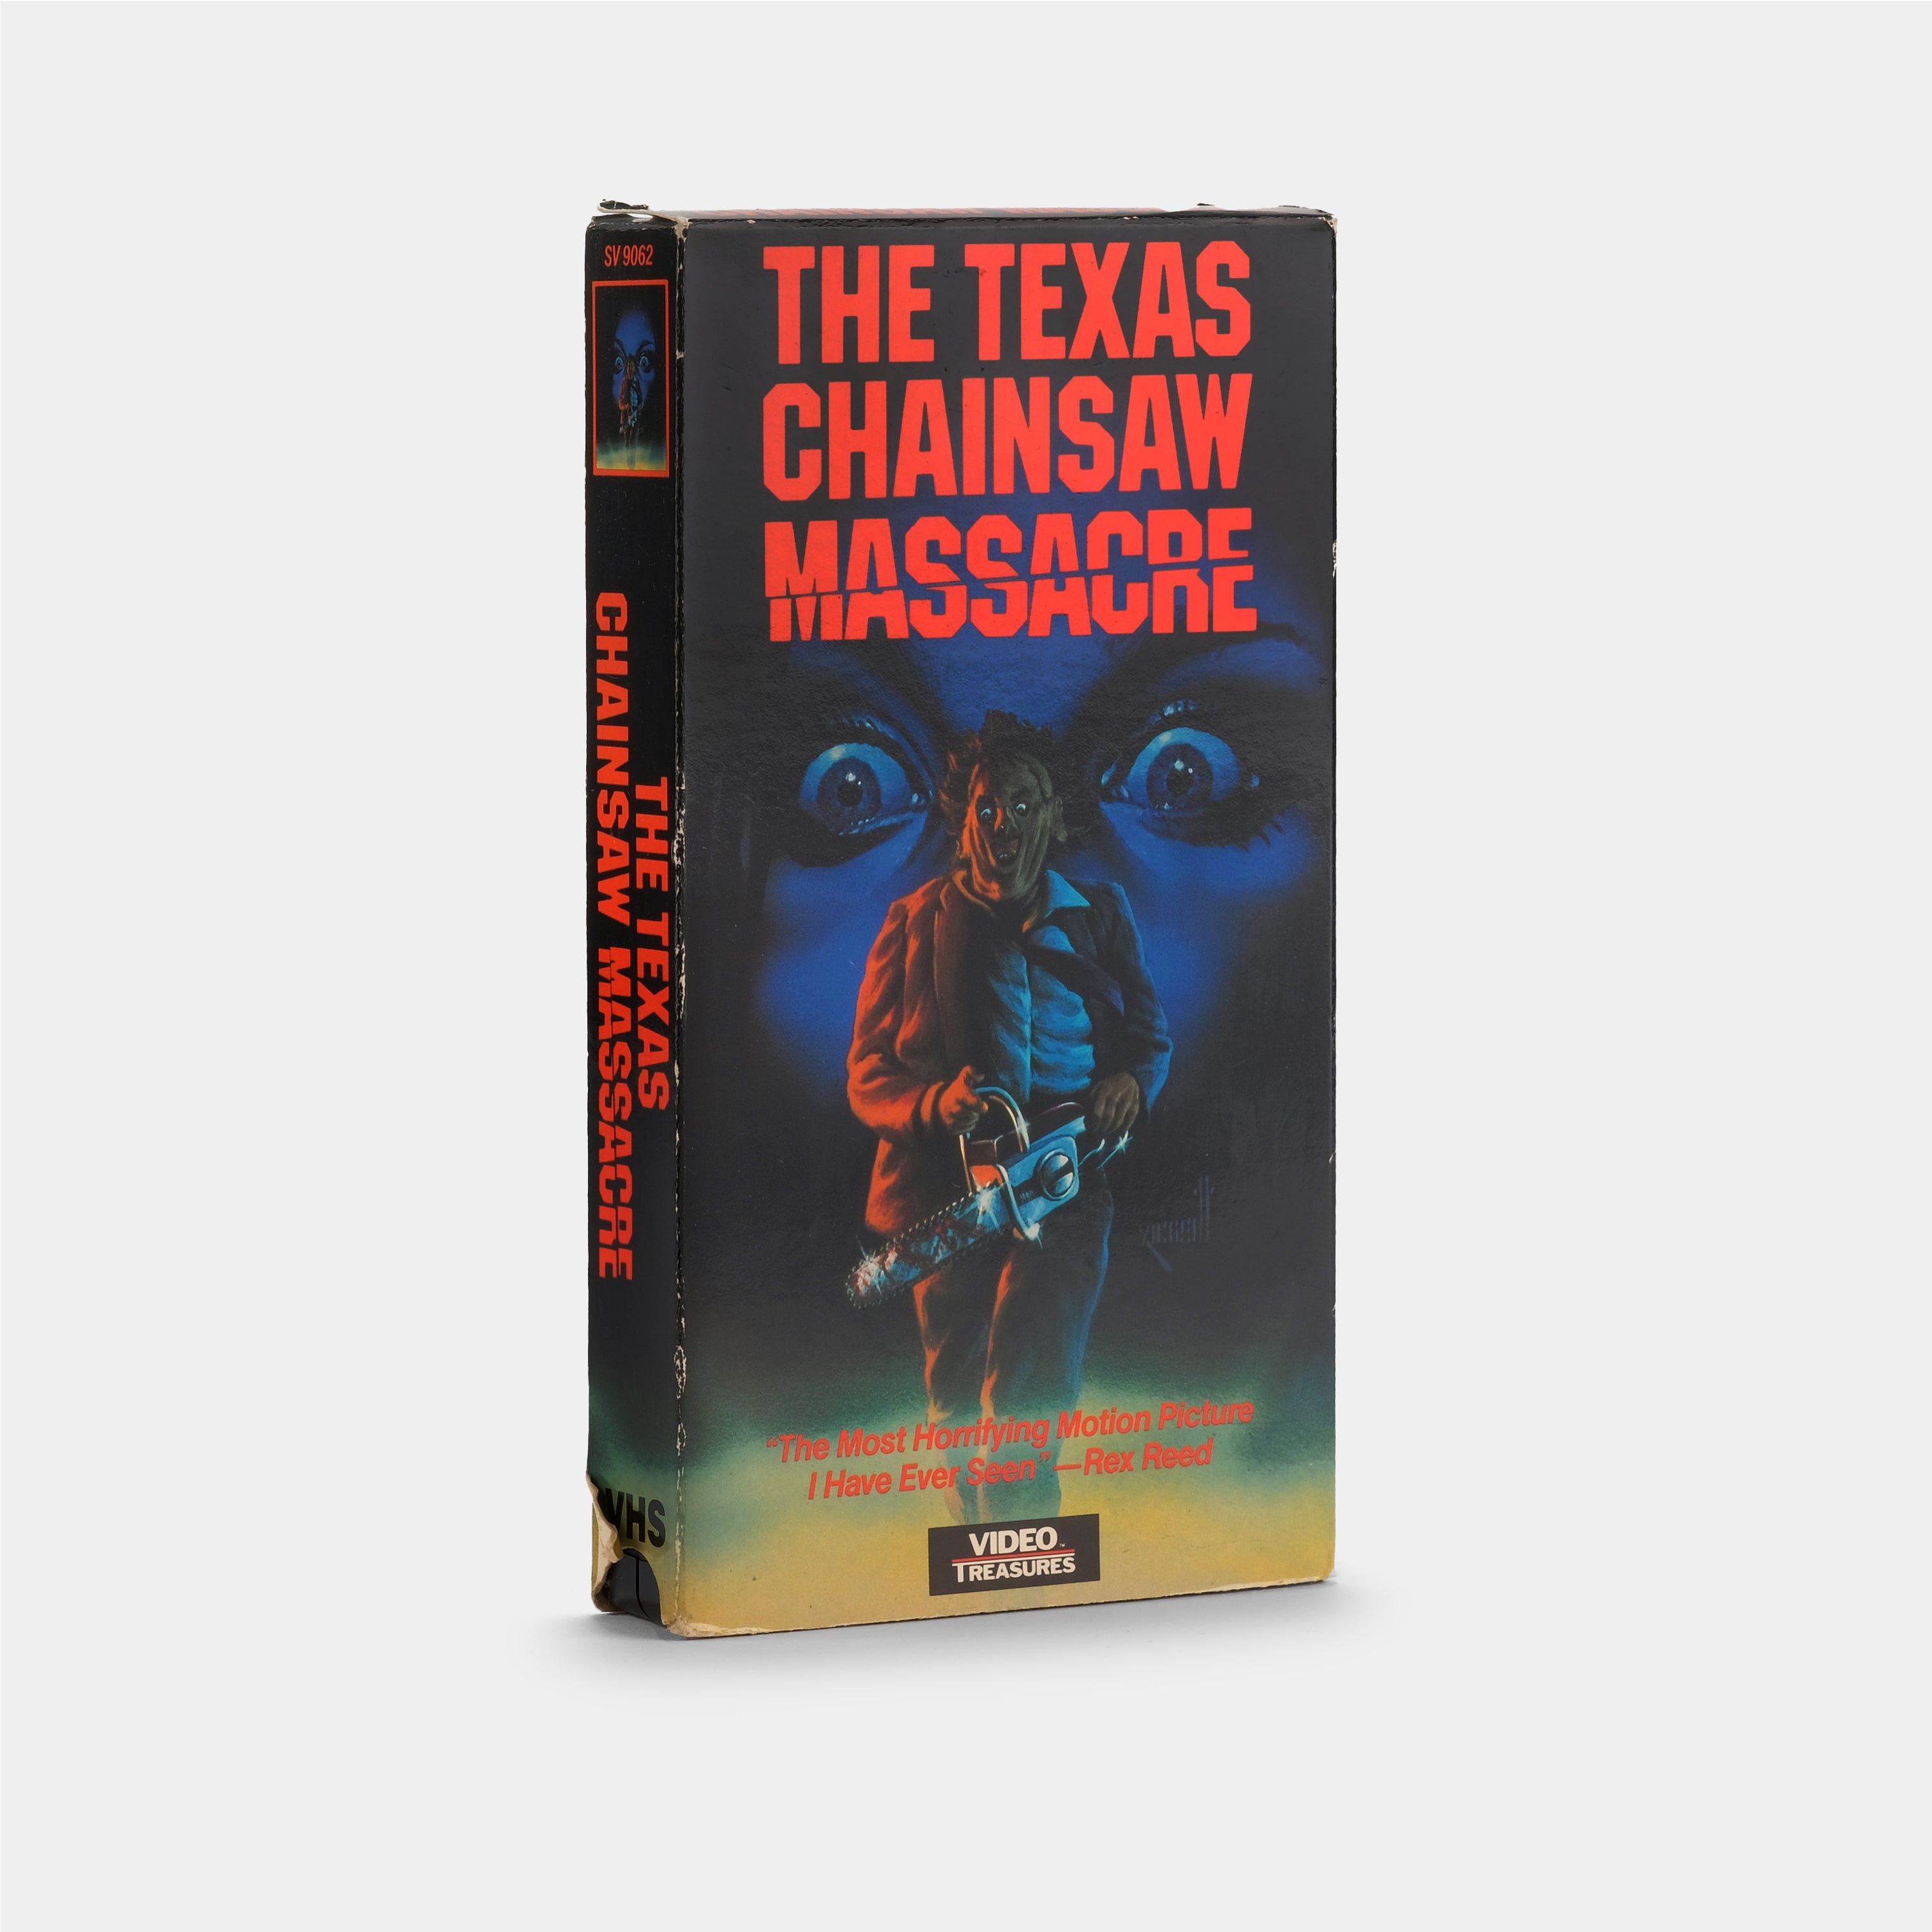 The Texas Chainsaw Massacre VHS Tape